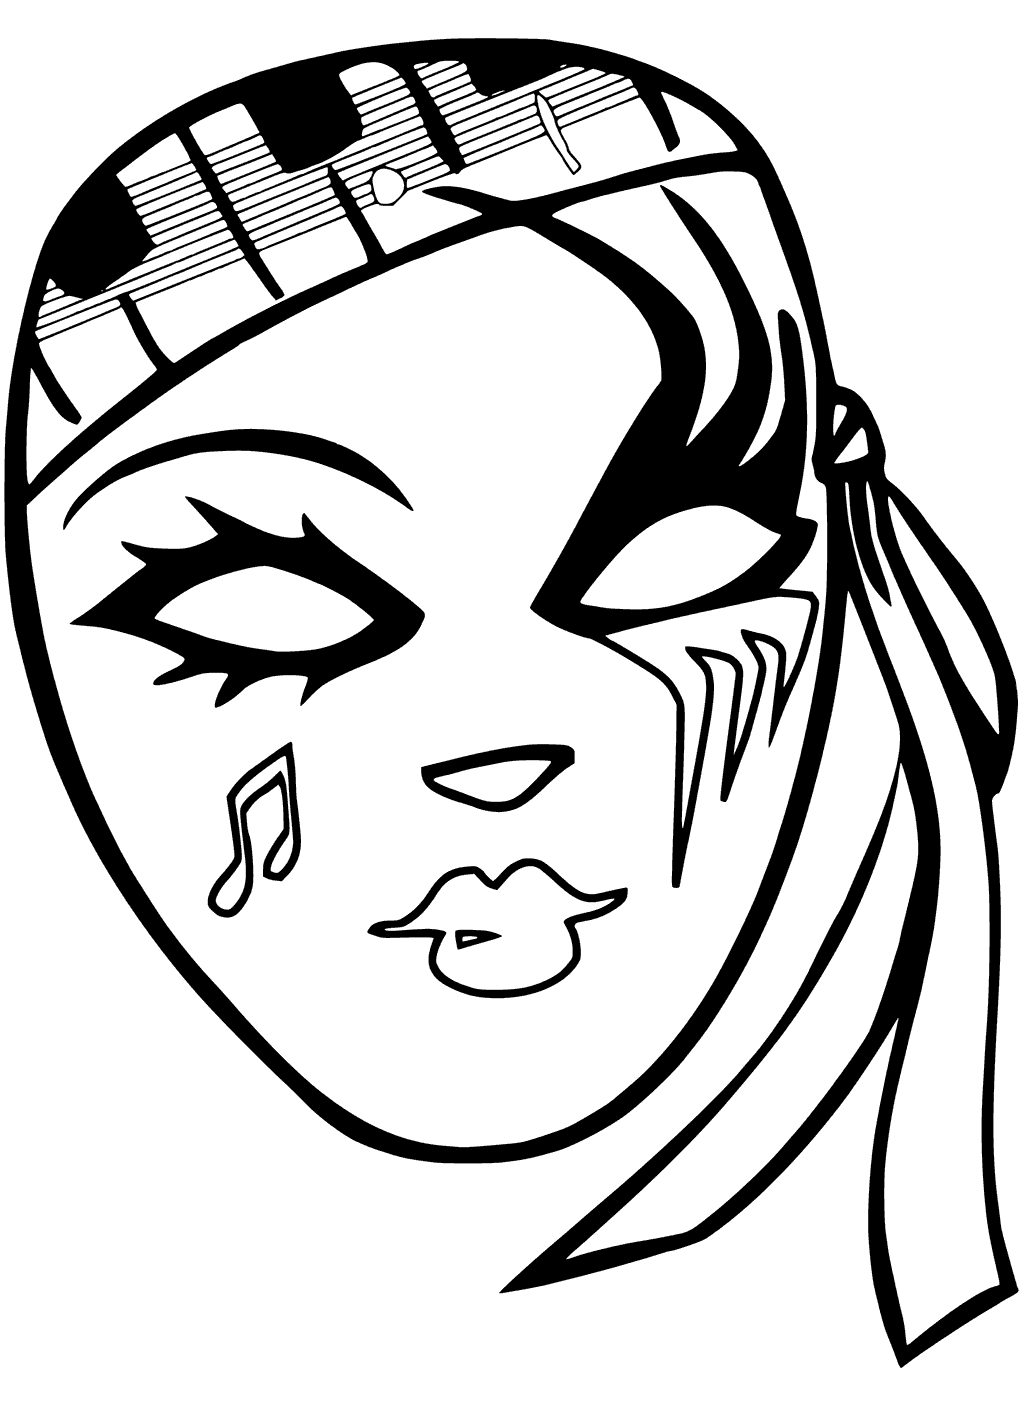 Printable Mask To Color Coloring Page